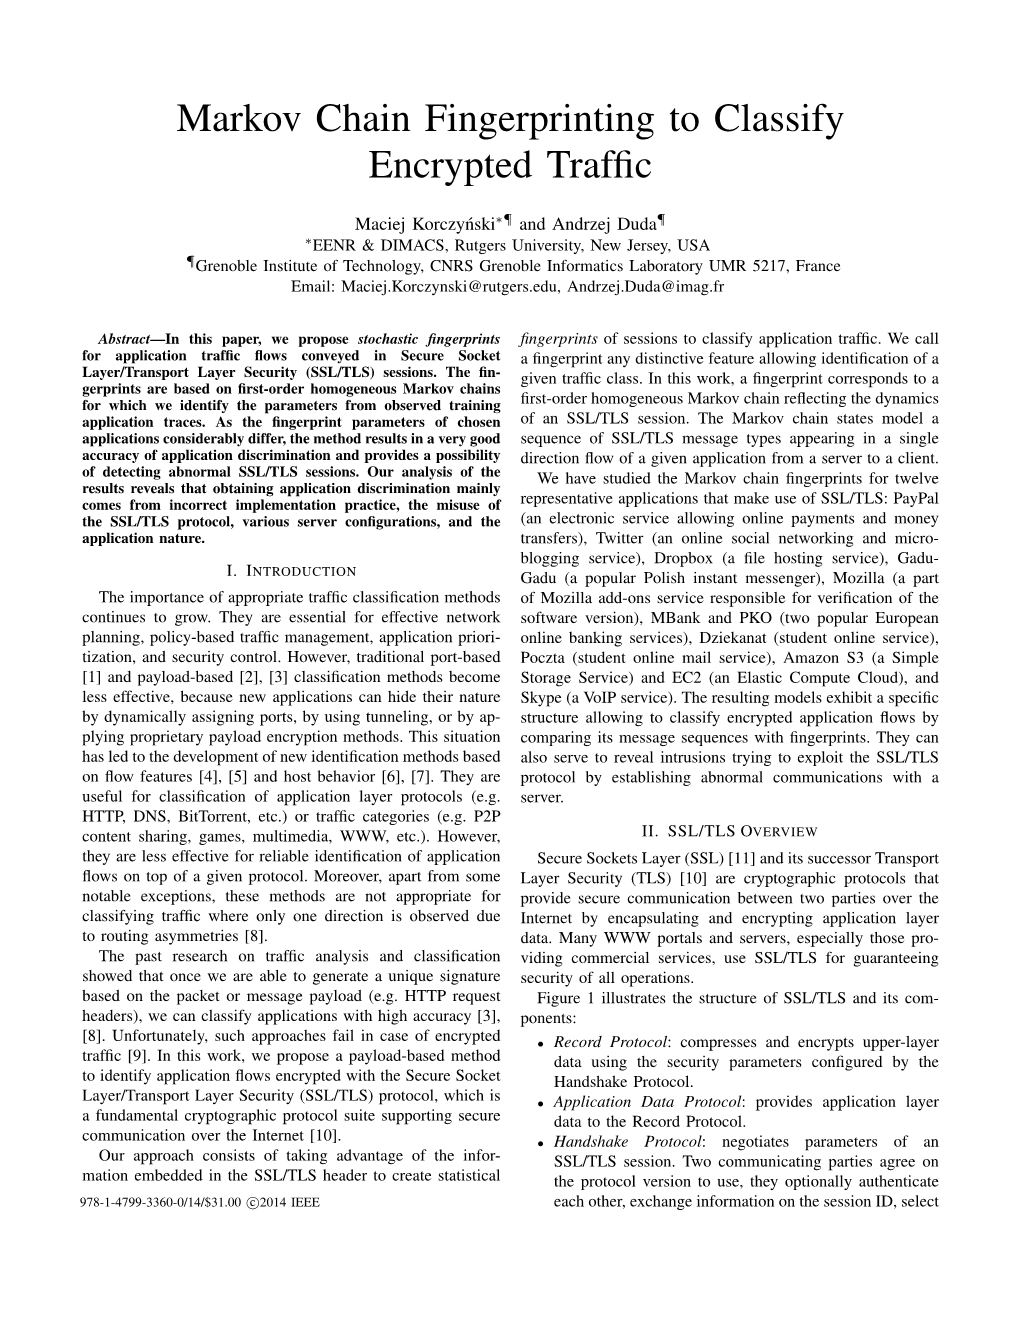 Markov Chain Fingerprinting to Classify Encrypted Traffic